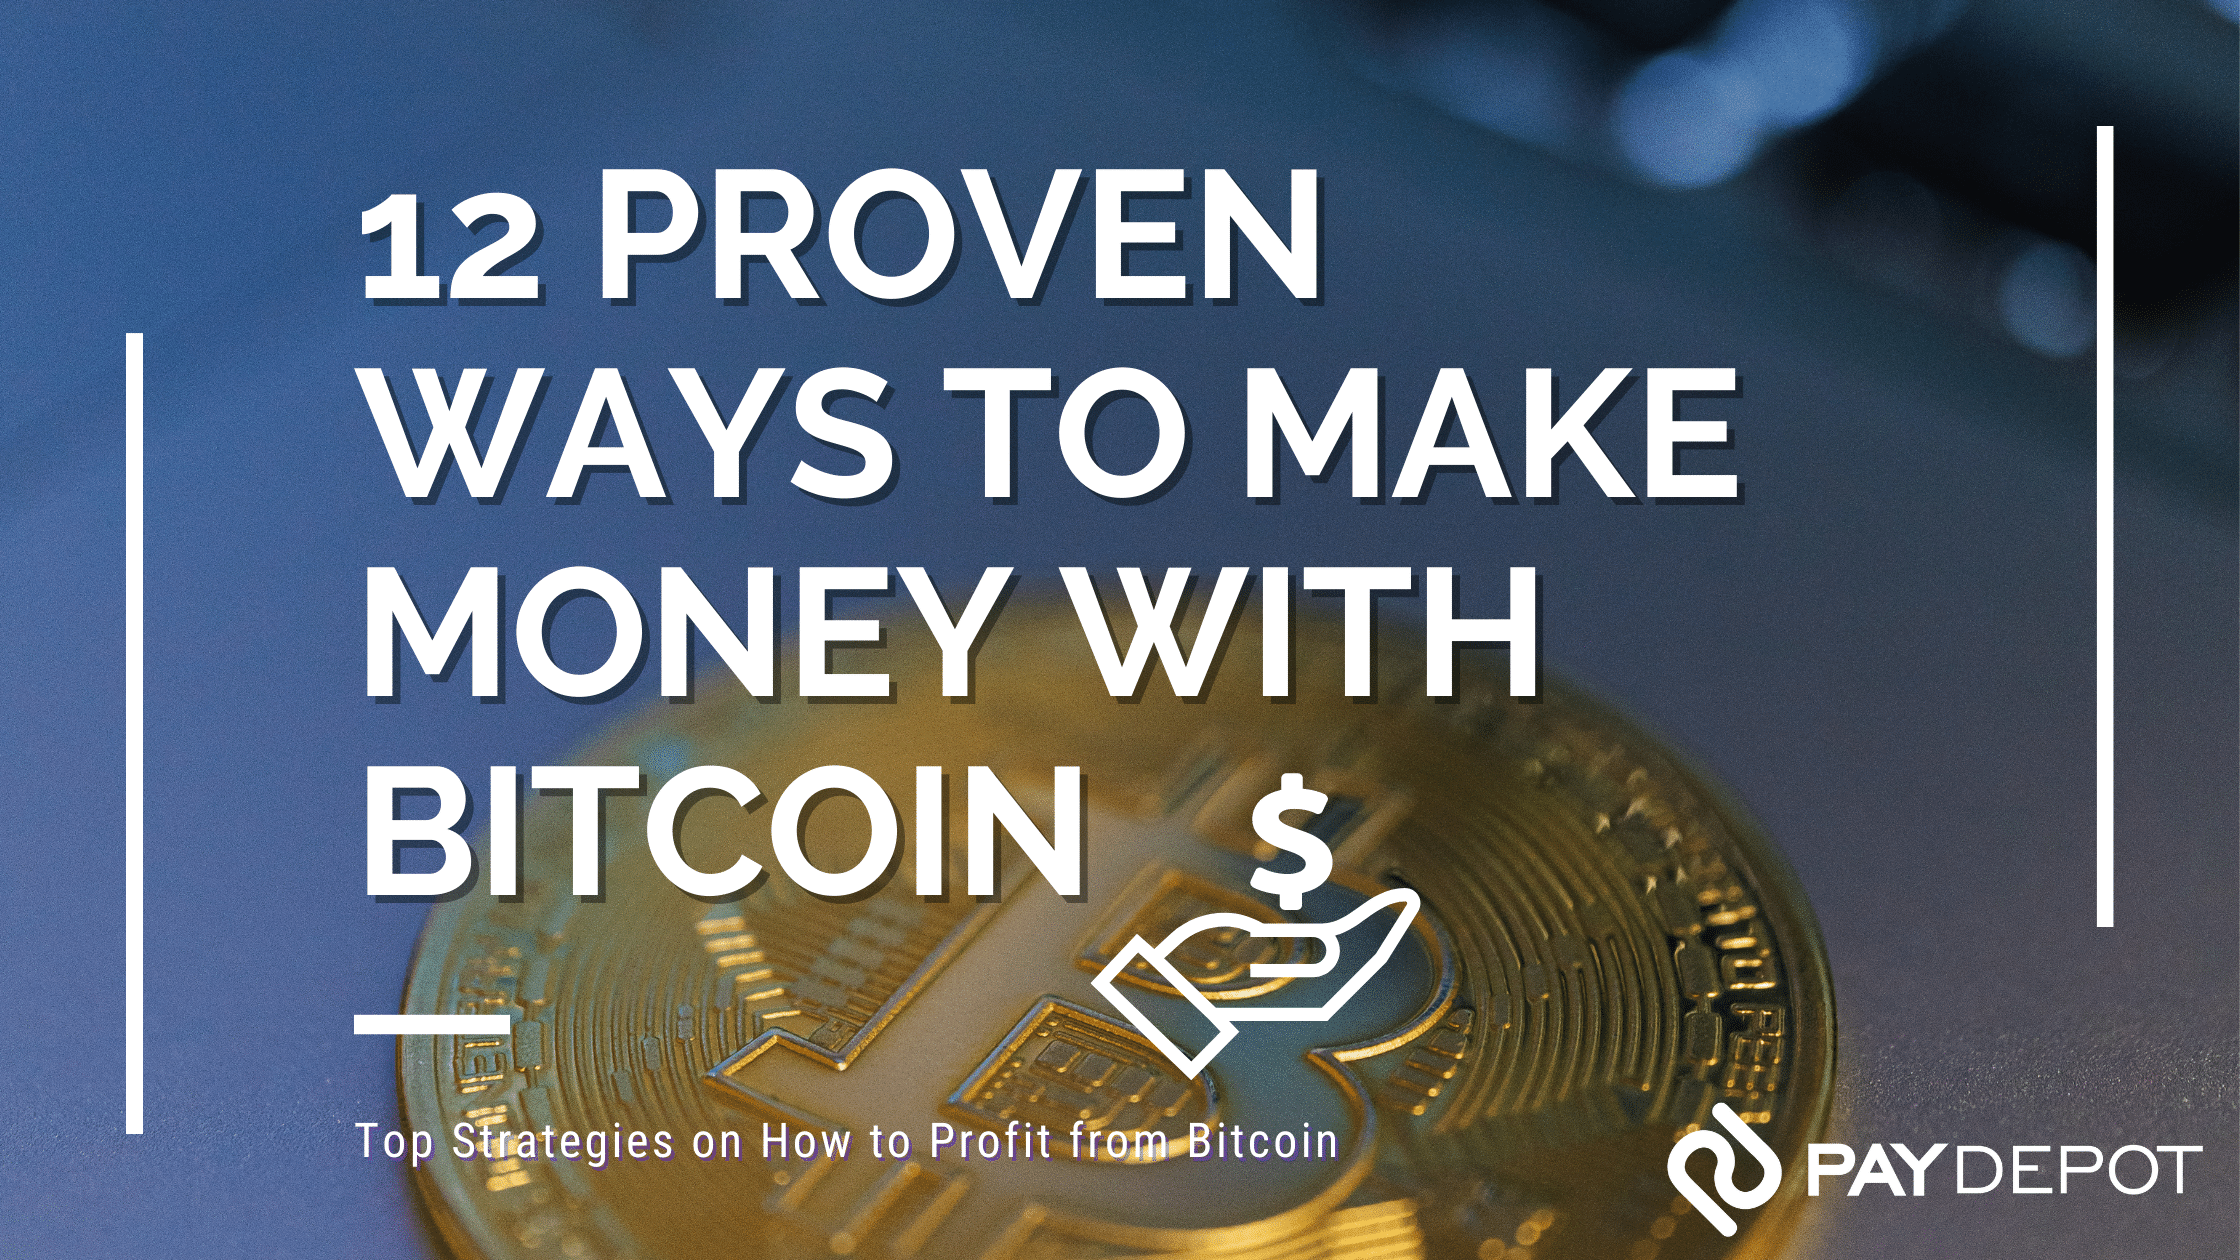 12 Proven Ways to Make Money with Bitcoin